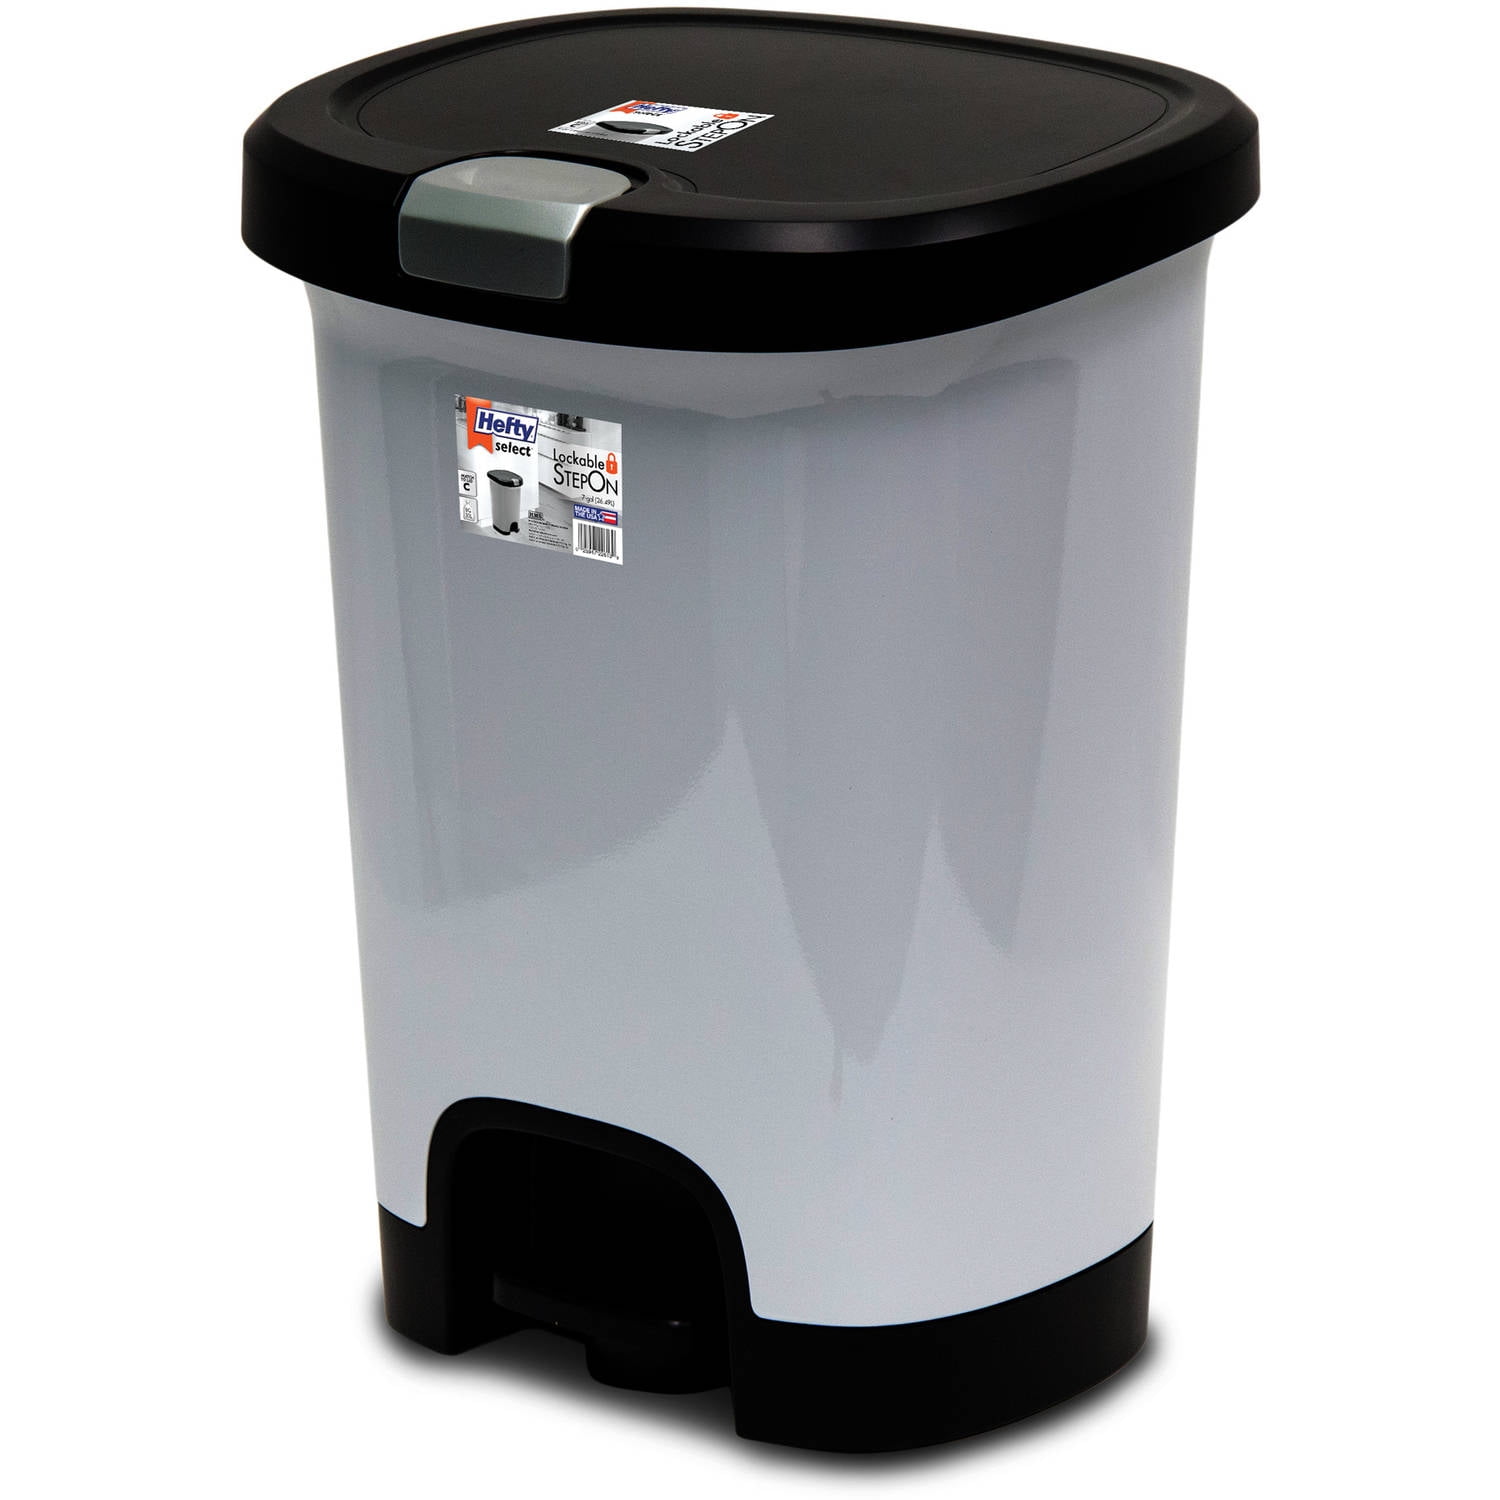 iTouchless 14-Gallon Trash Can with Infrared-Sensor Lid Opener, Black 14.5 Gallon Stainless Steel Trash Can